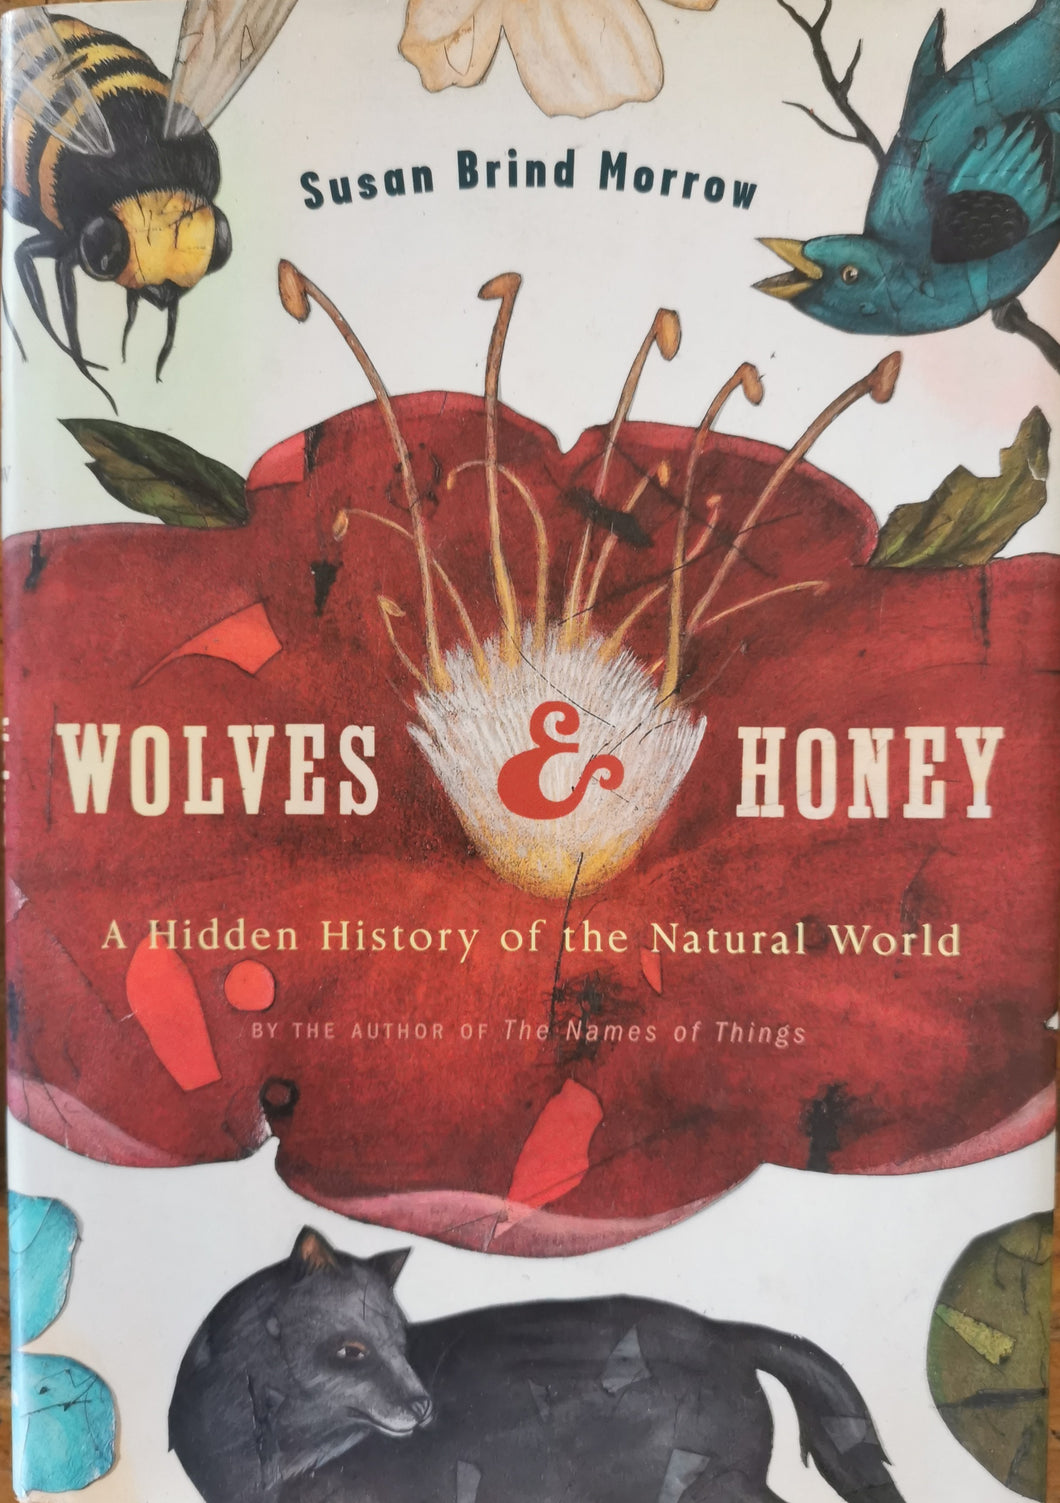 Wolves & Honey: A Hidden History of the Natural World by Susan Brind Morrow